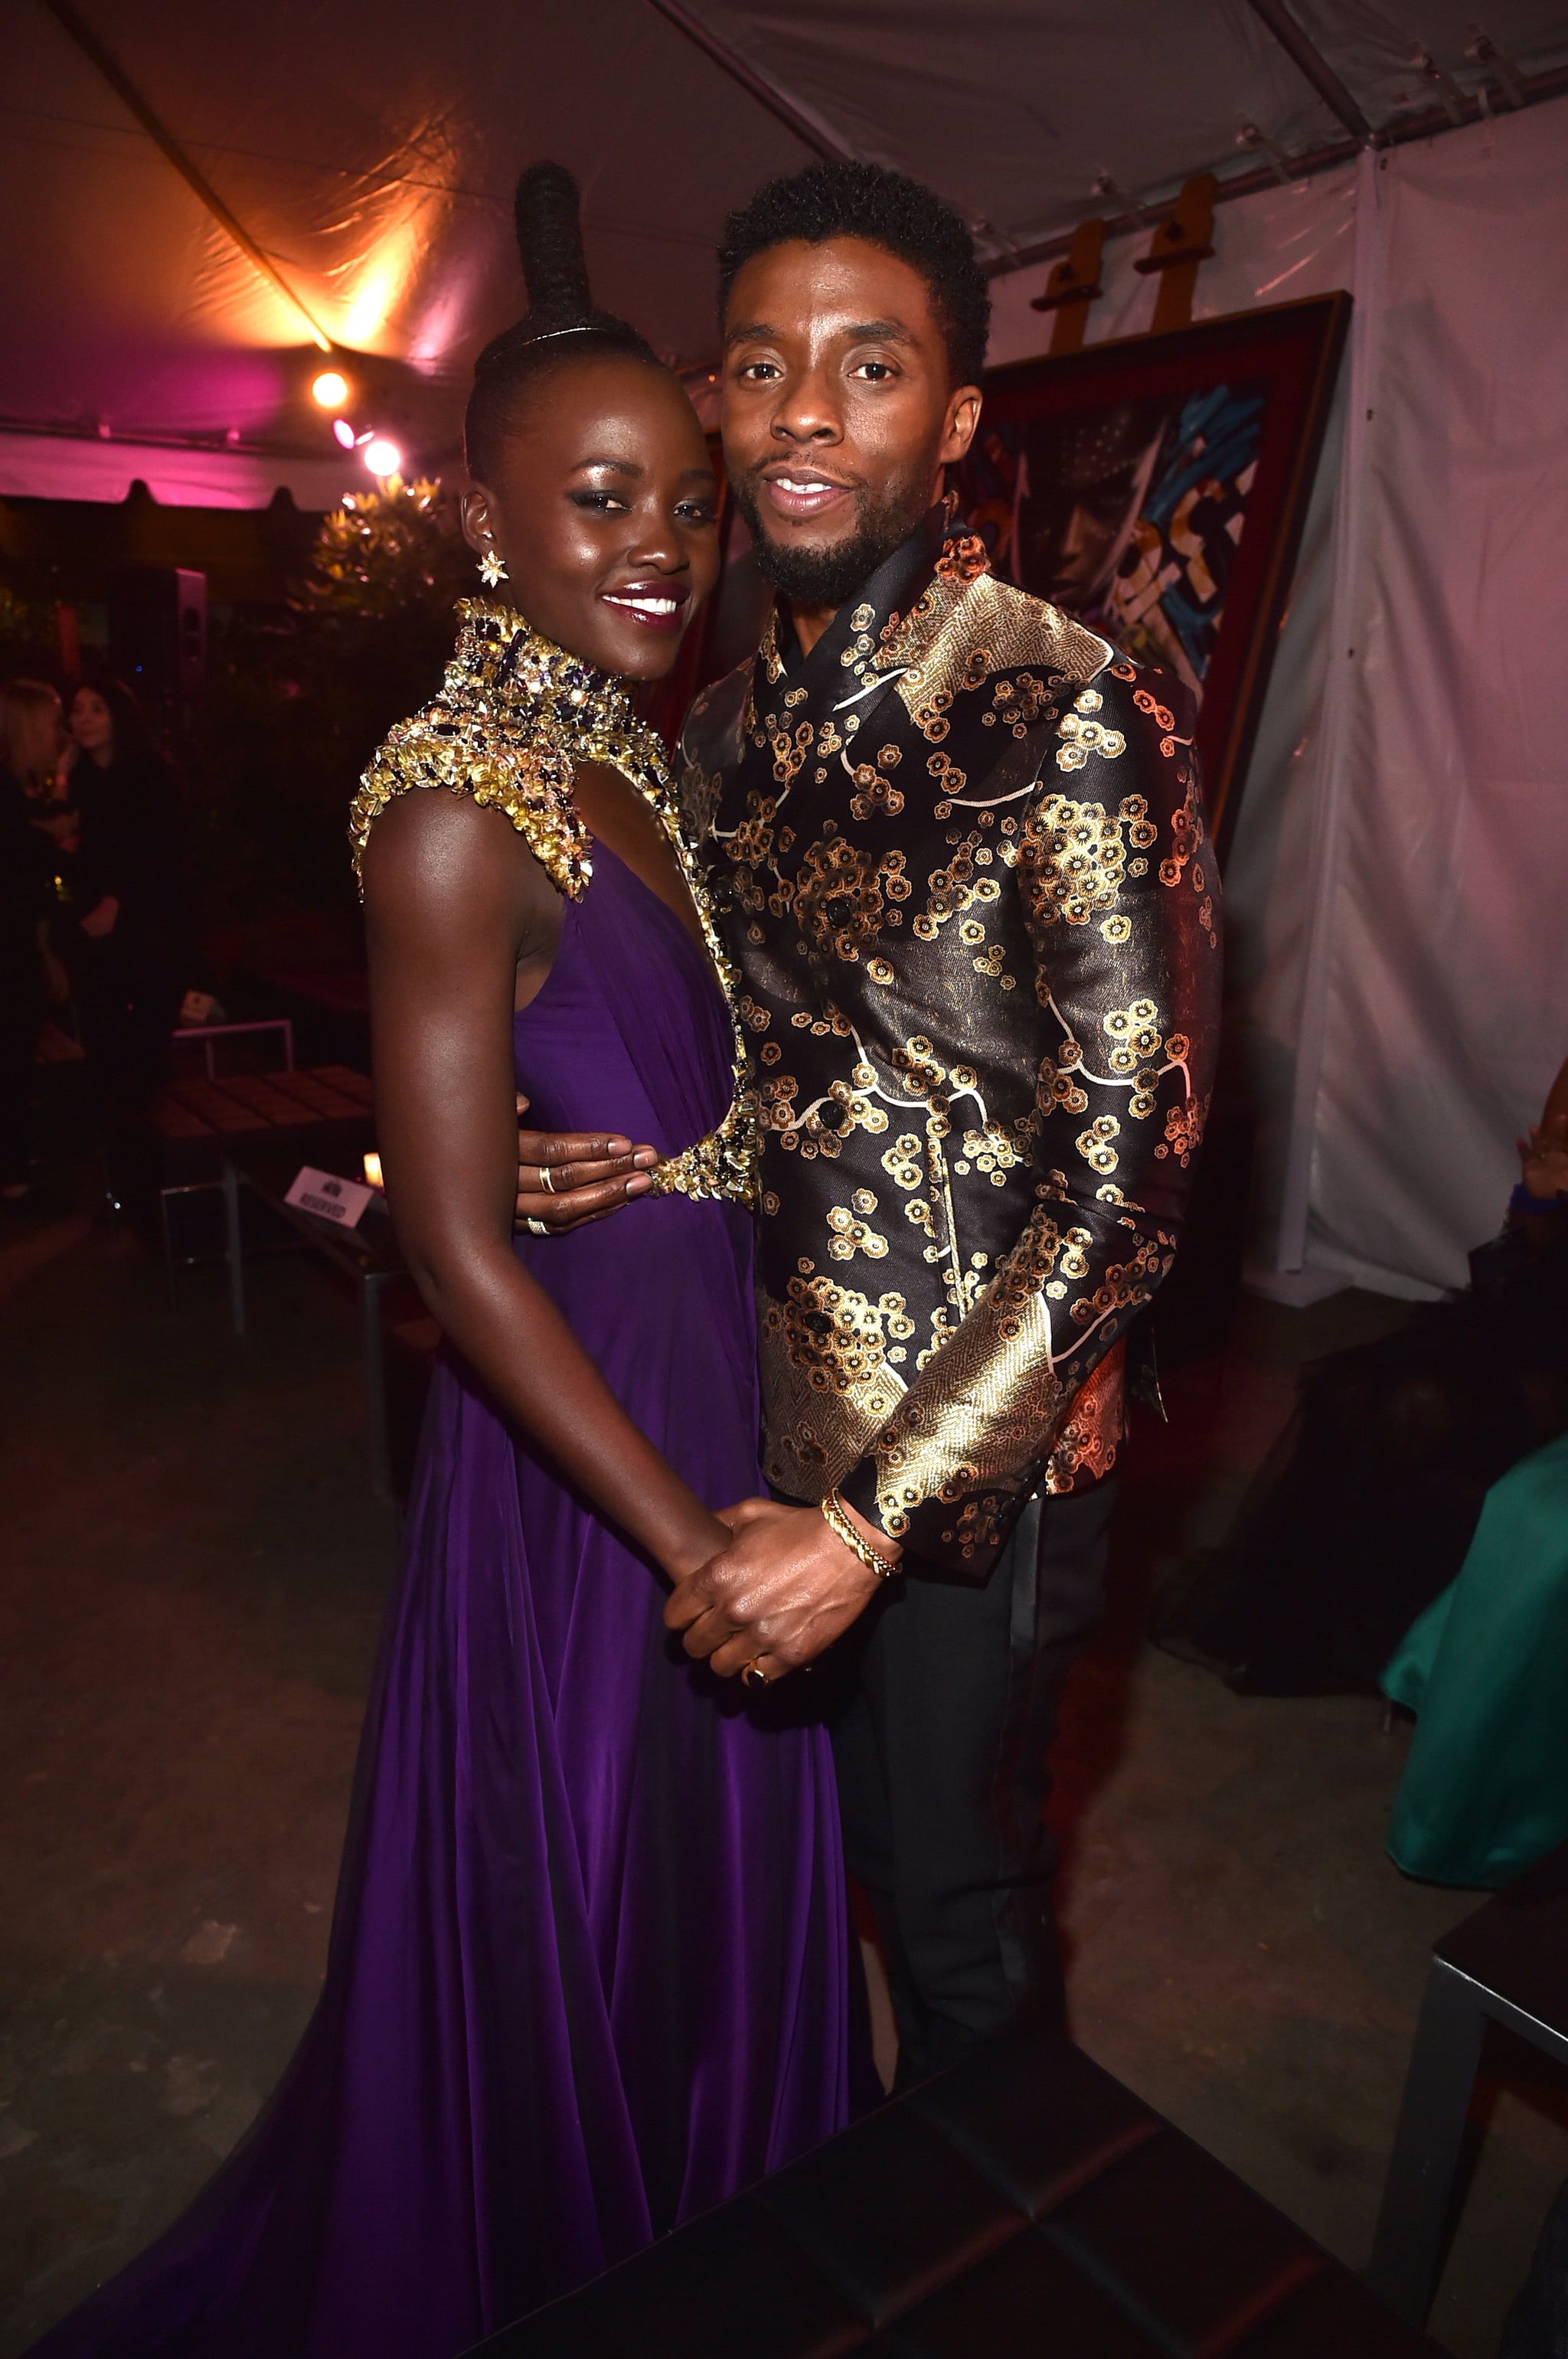 HOLLYWOOD, CA - JANUARY 29: Actors Lupita Nyong'o (L) and Chadwick Boseman at the Los Angeles World Premiere of Marvel Studios' BLACK PANTHER at Dolby Theatre on January 29, 2018 in Hollywood, California.  (Photo by Alberto E. Rodriguez/Getty Images for Disney)